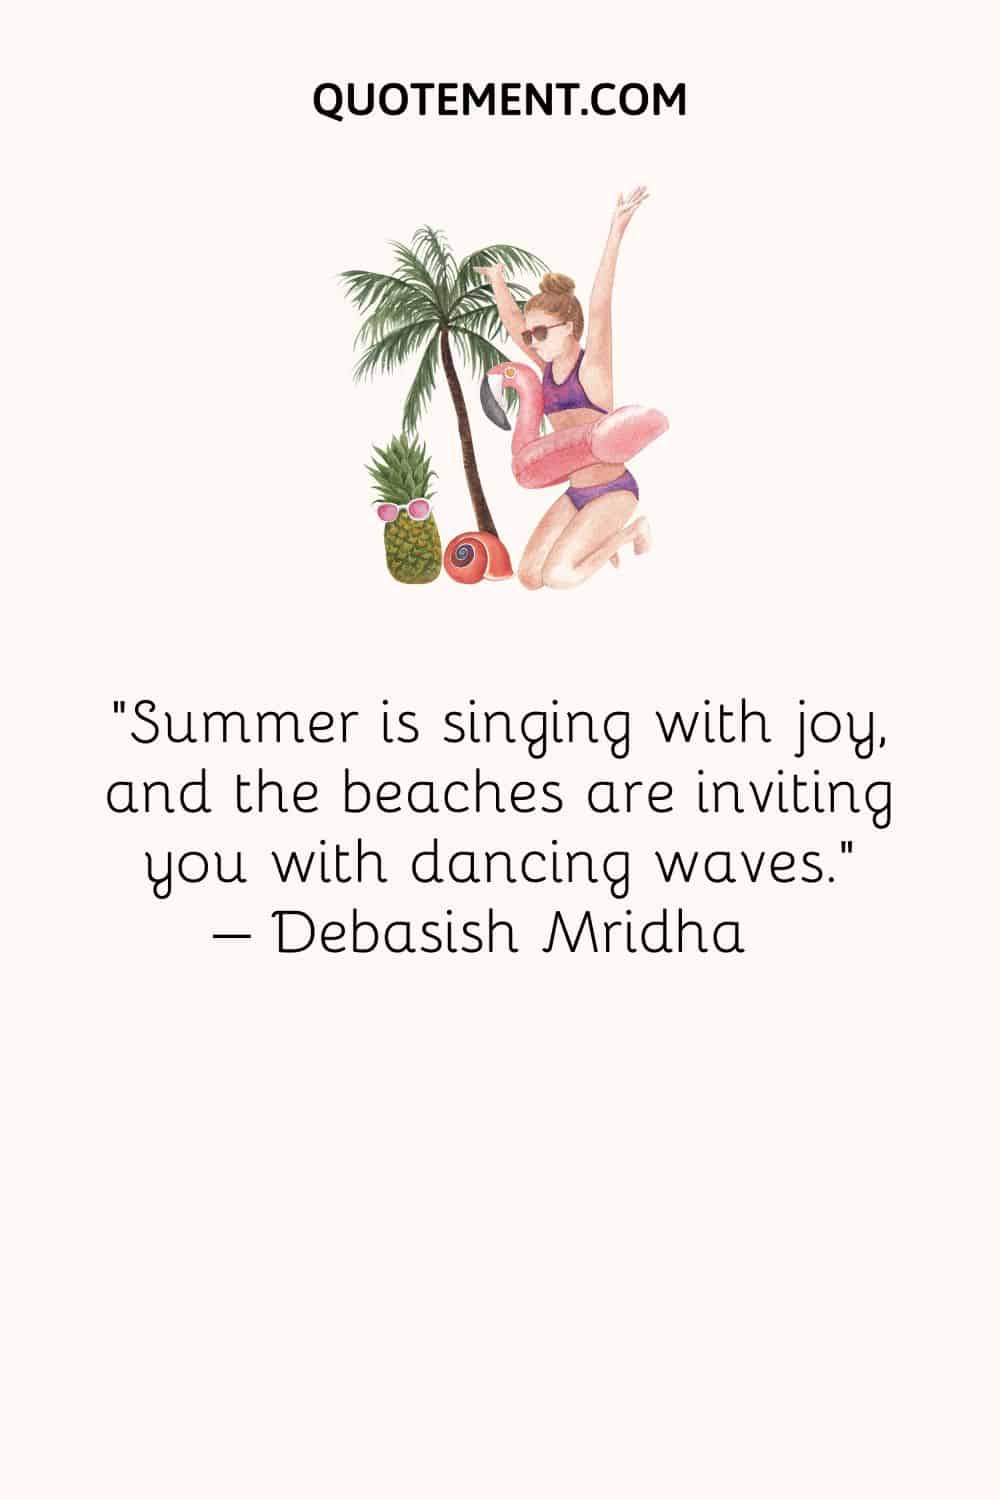 Summer is singing with joy, and the beaches are inviting you with dancing waves. – Debasish Mridha